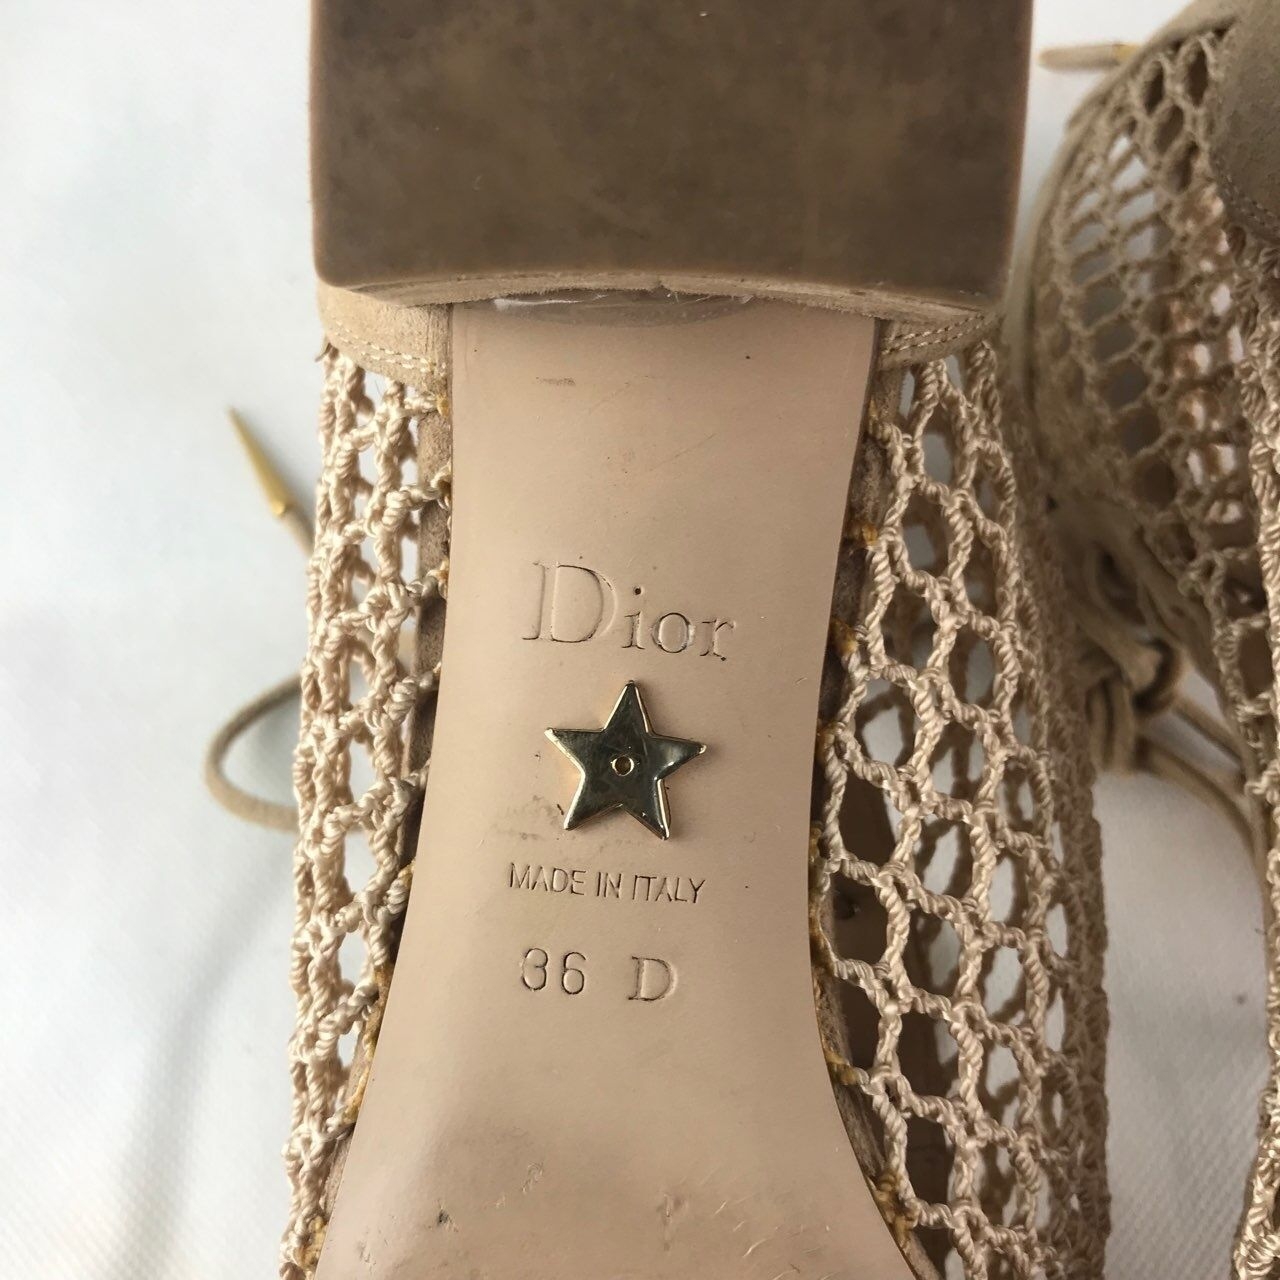 Christian Dior Suede Resille Naughtily-D Beige Woven Boots